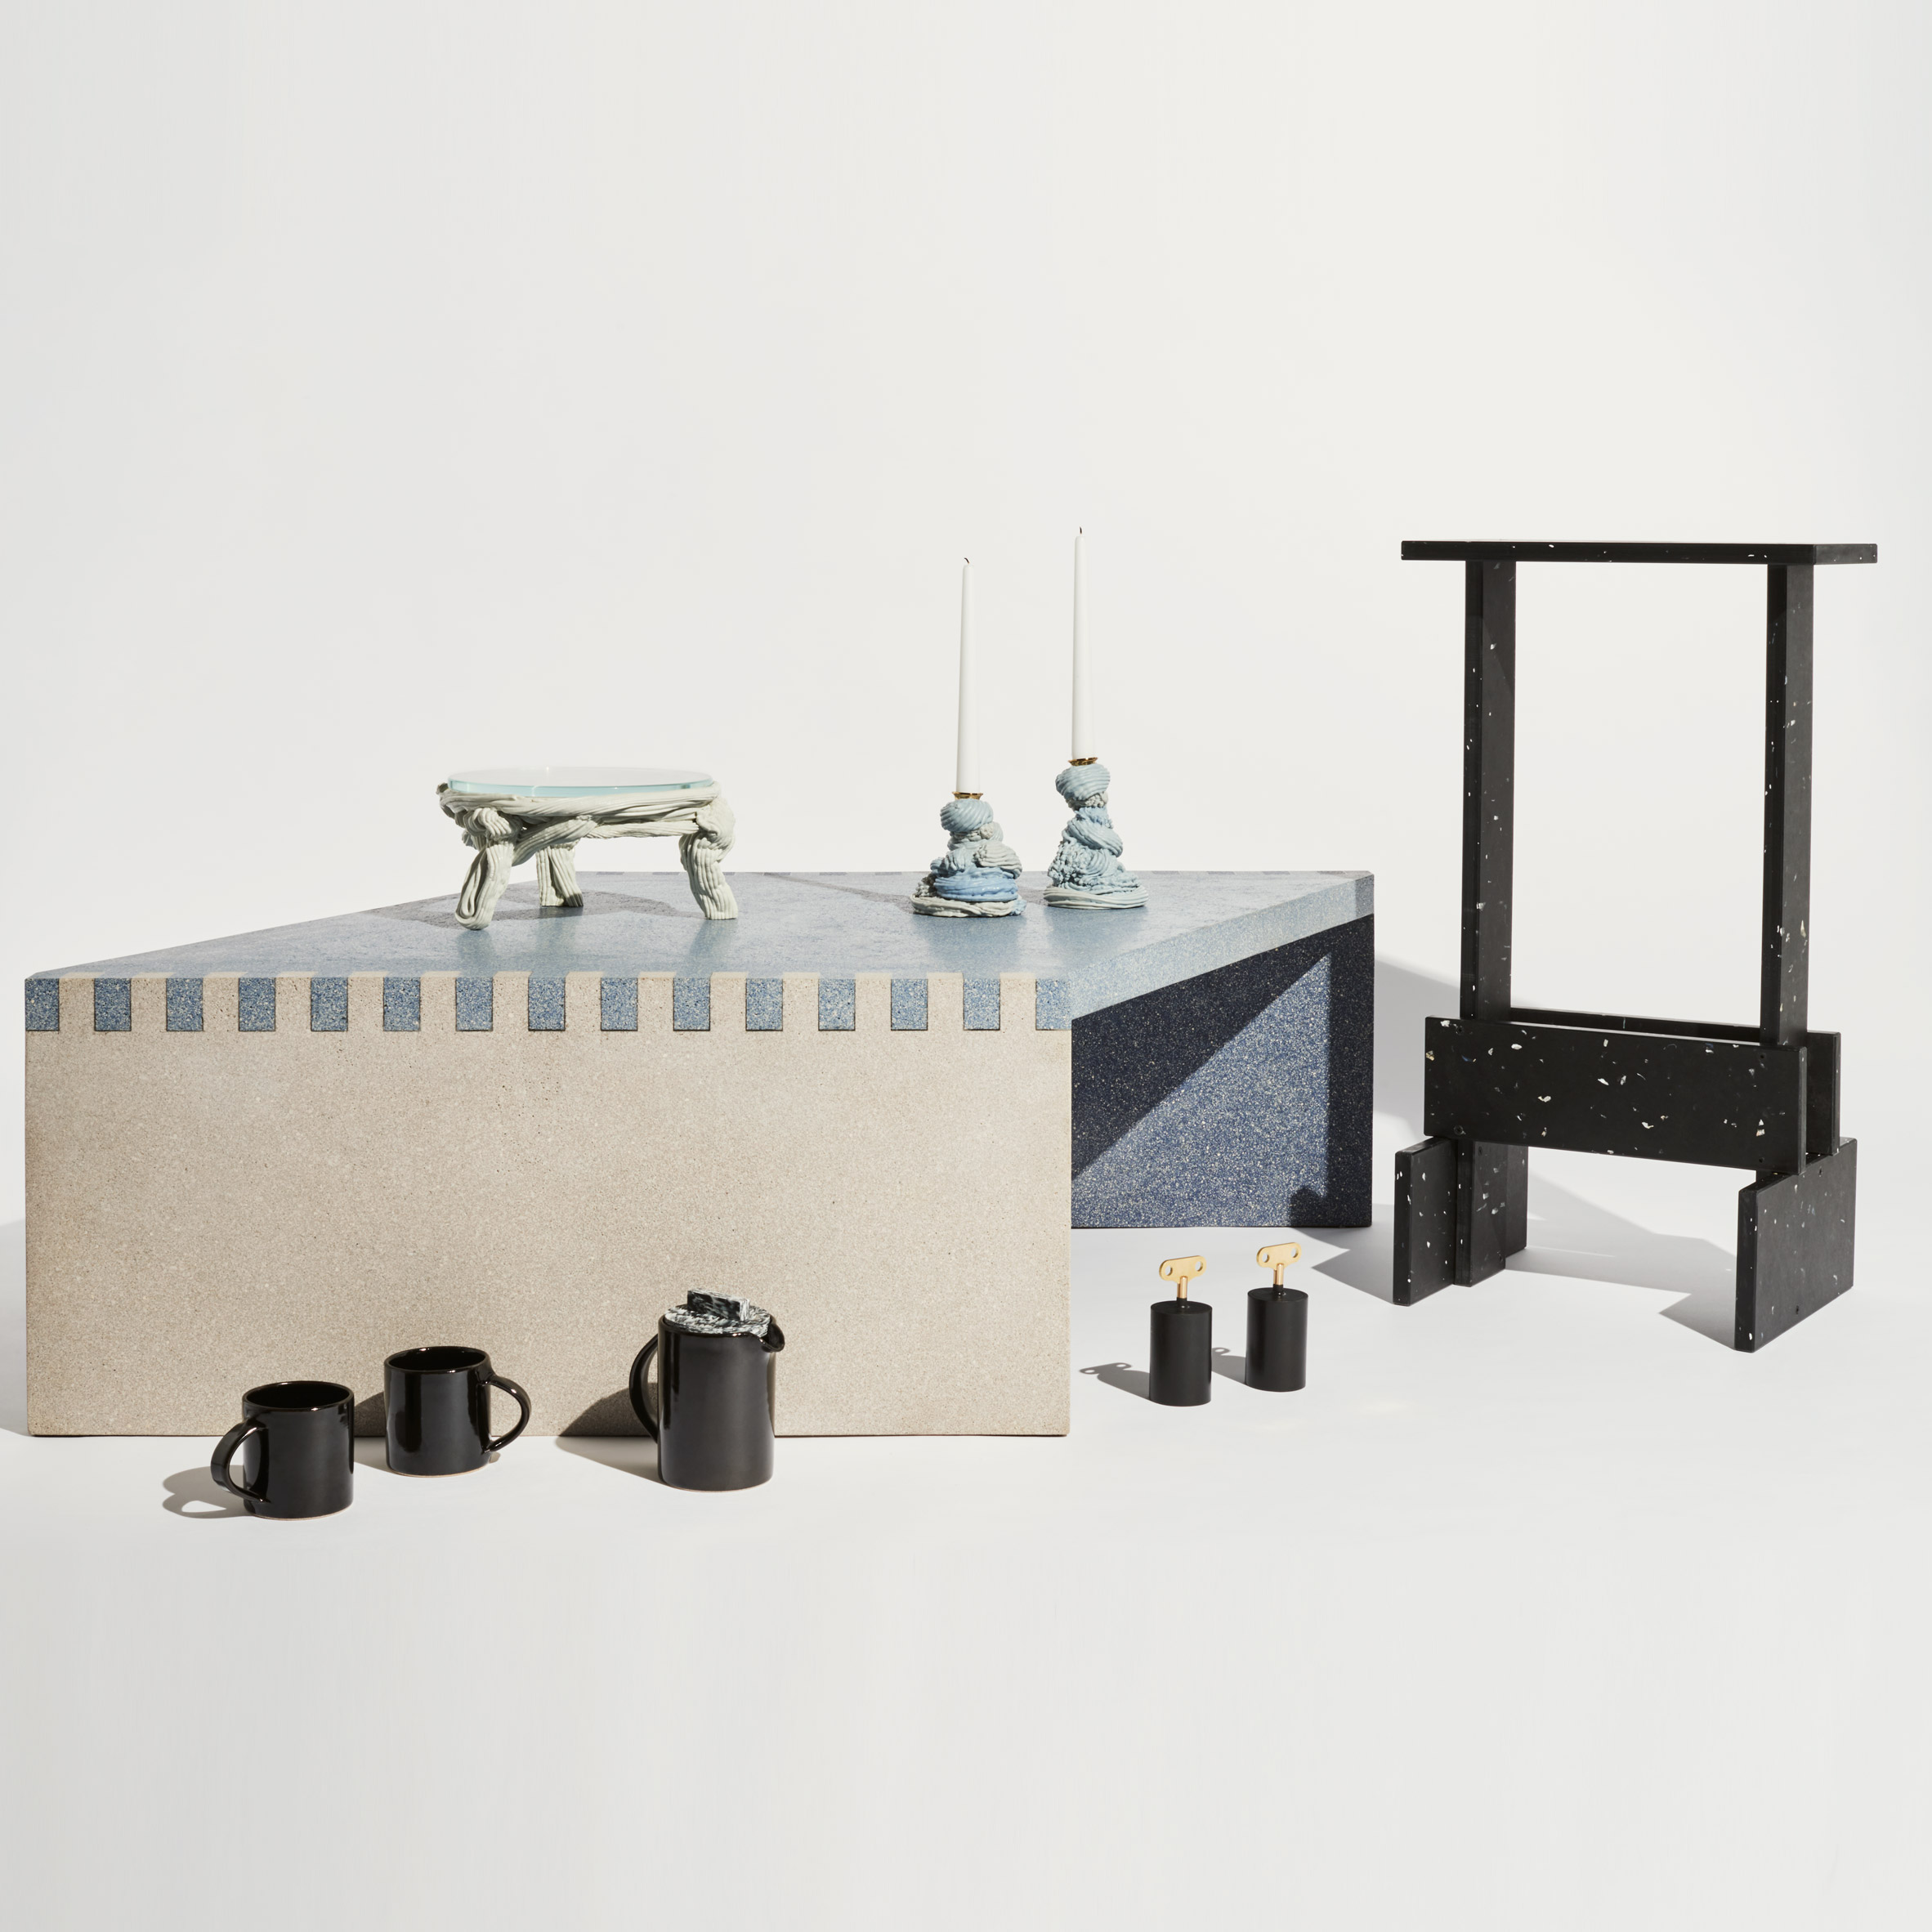 Recycled baths and TV screens feature in Ready Made Go 3 collection-0